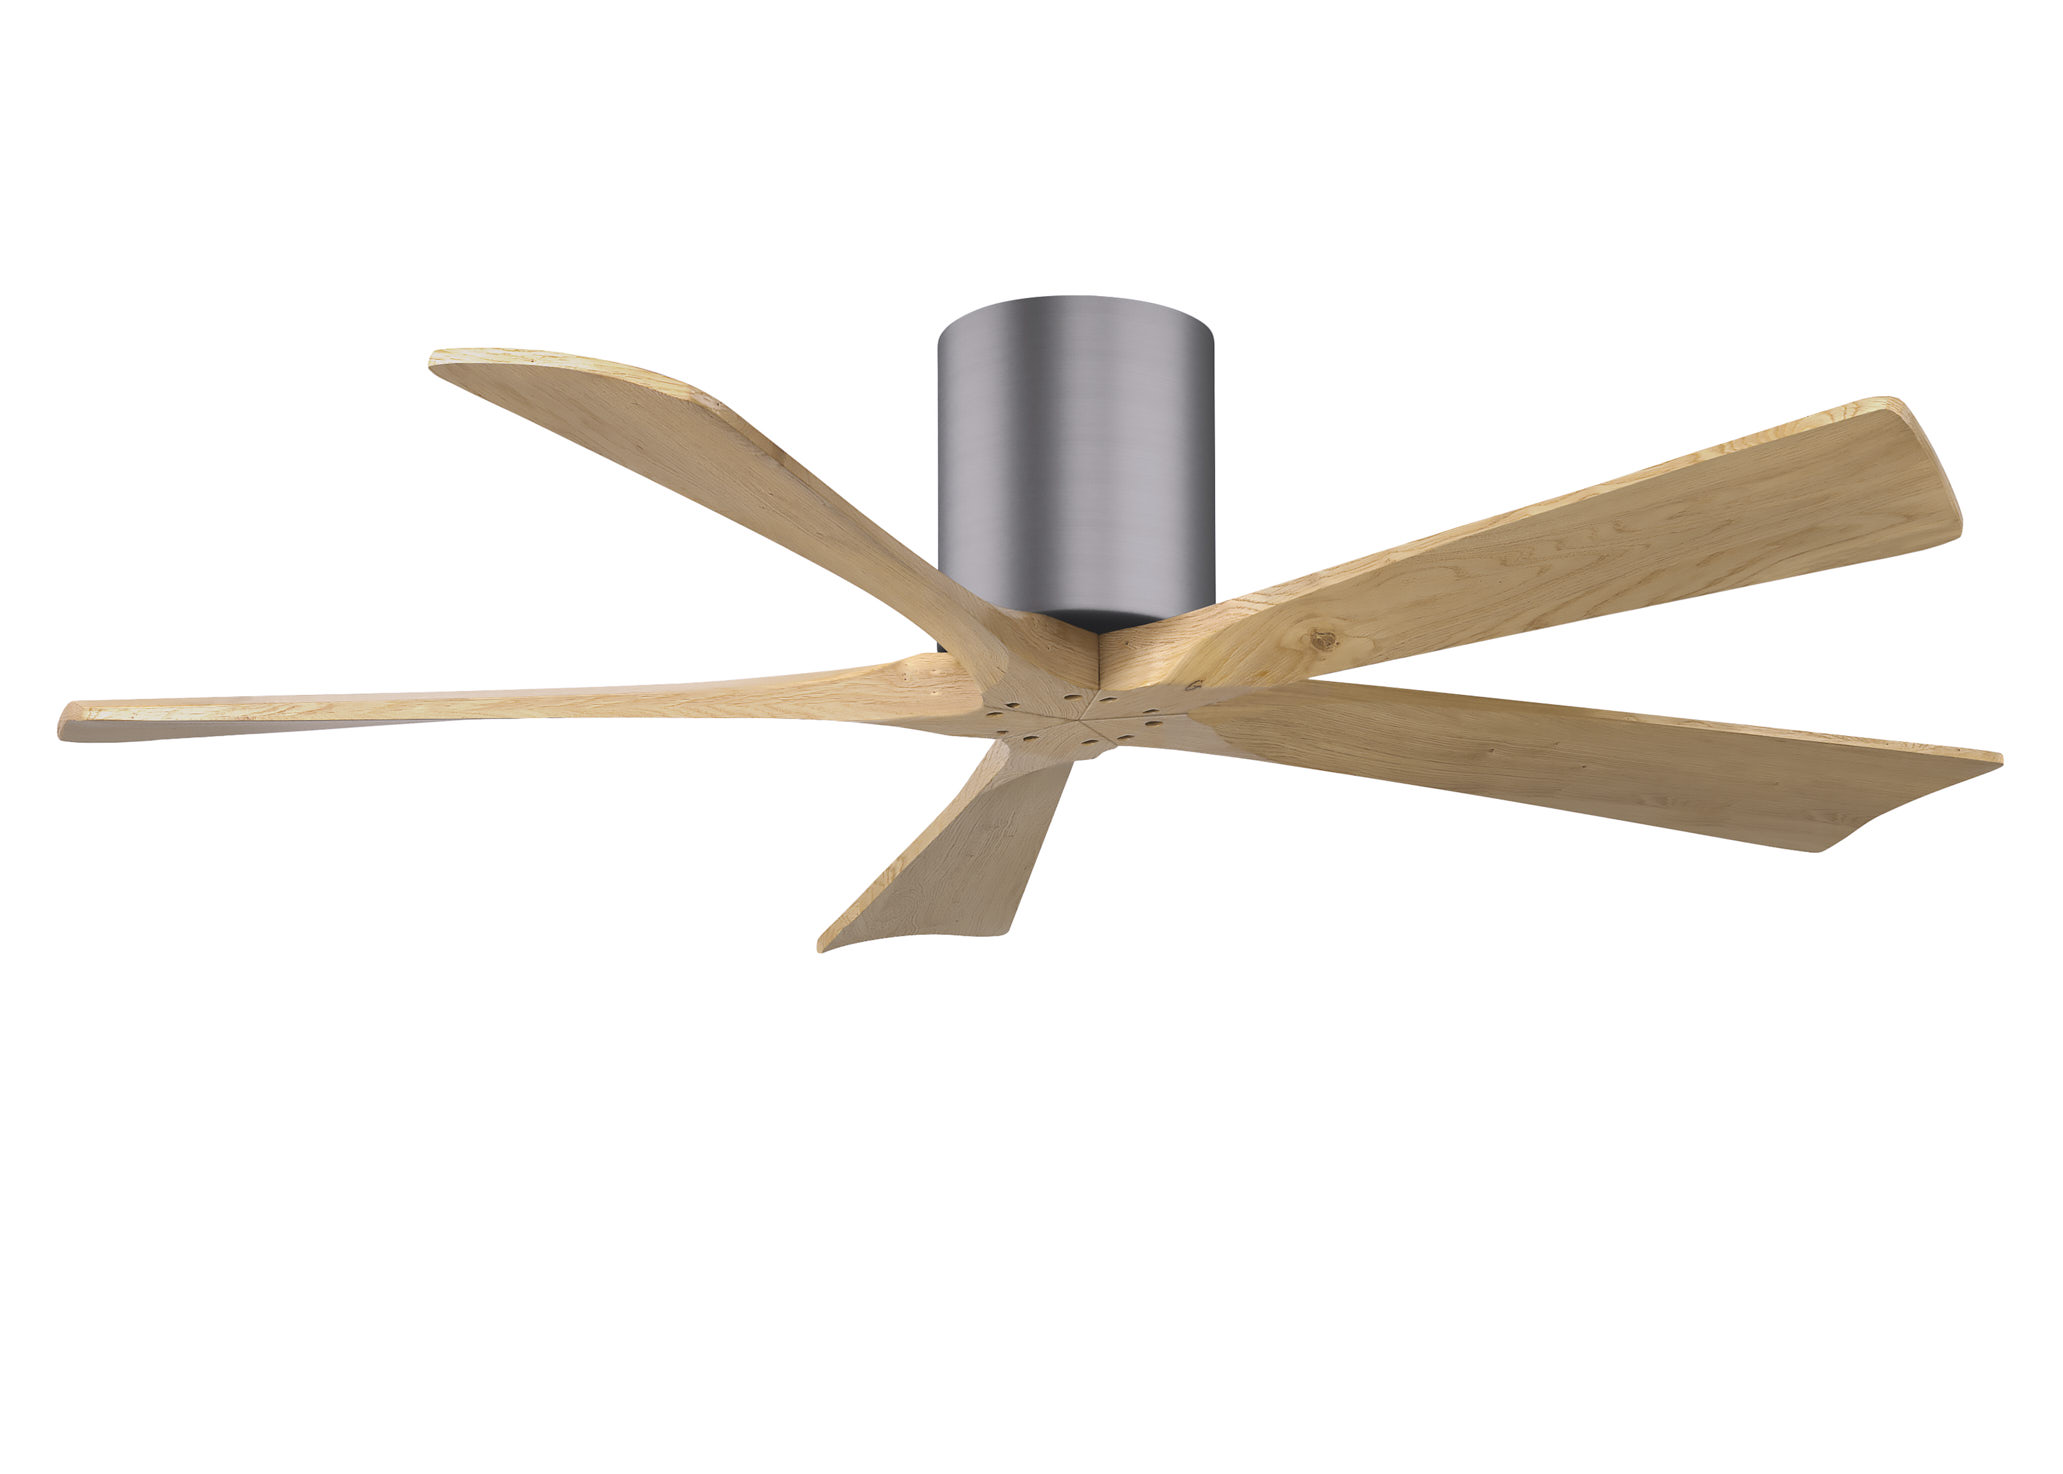 Irene-5H 6-speed ceiling fan in brushed pewter finish with 52